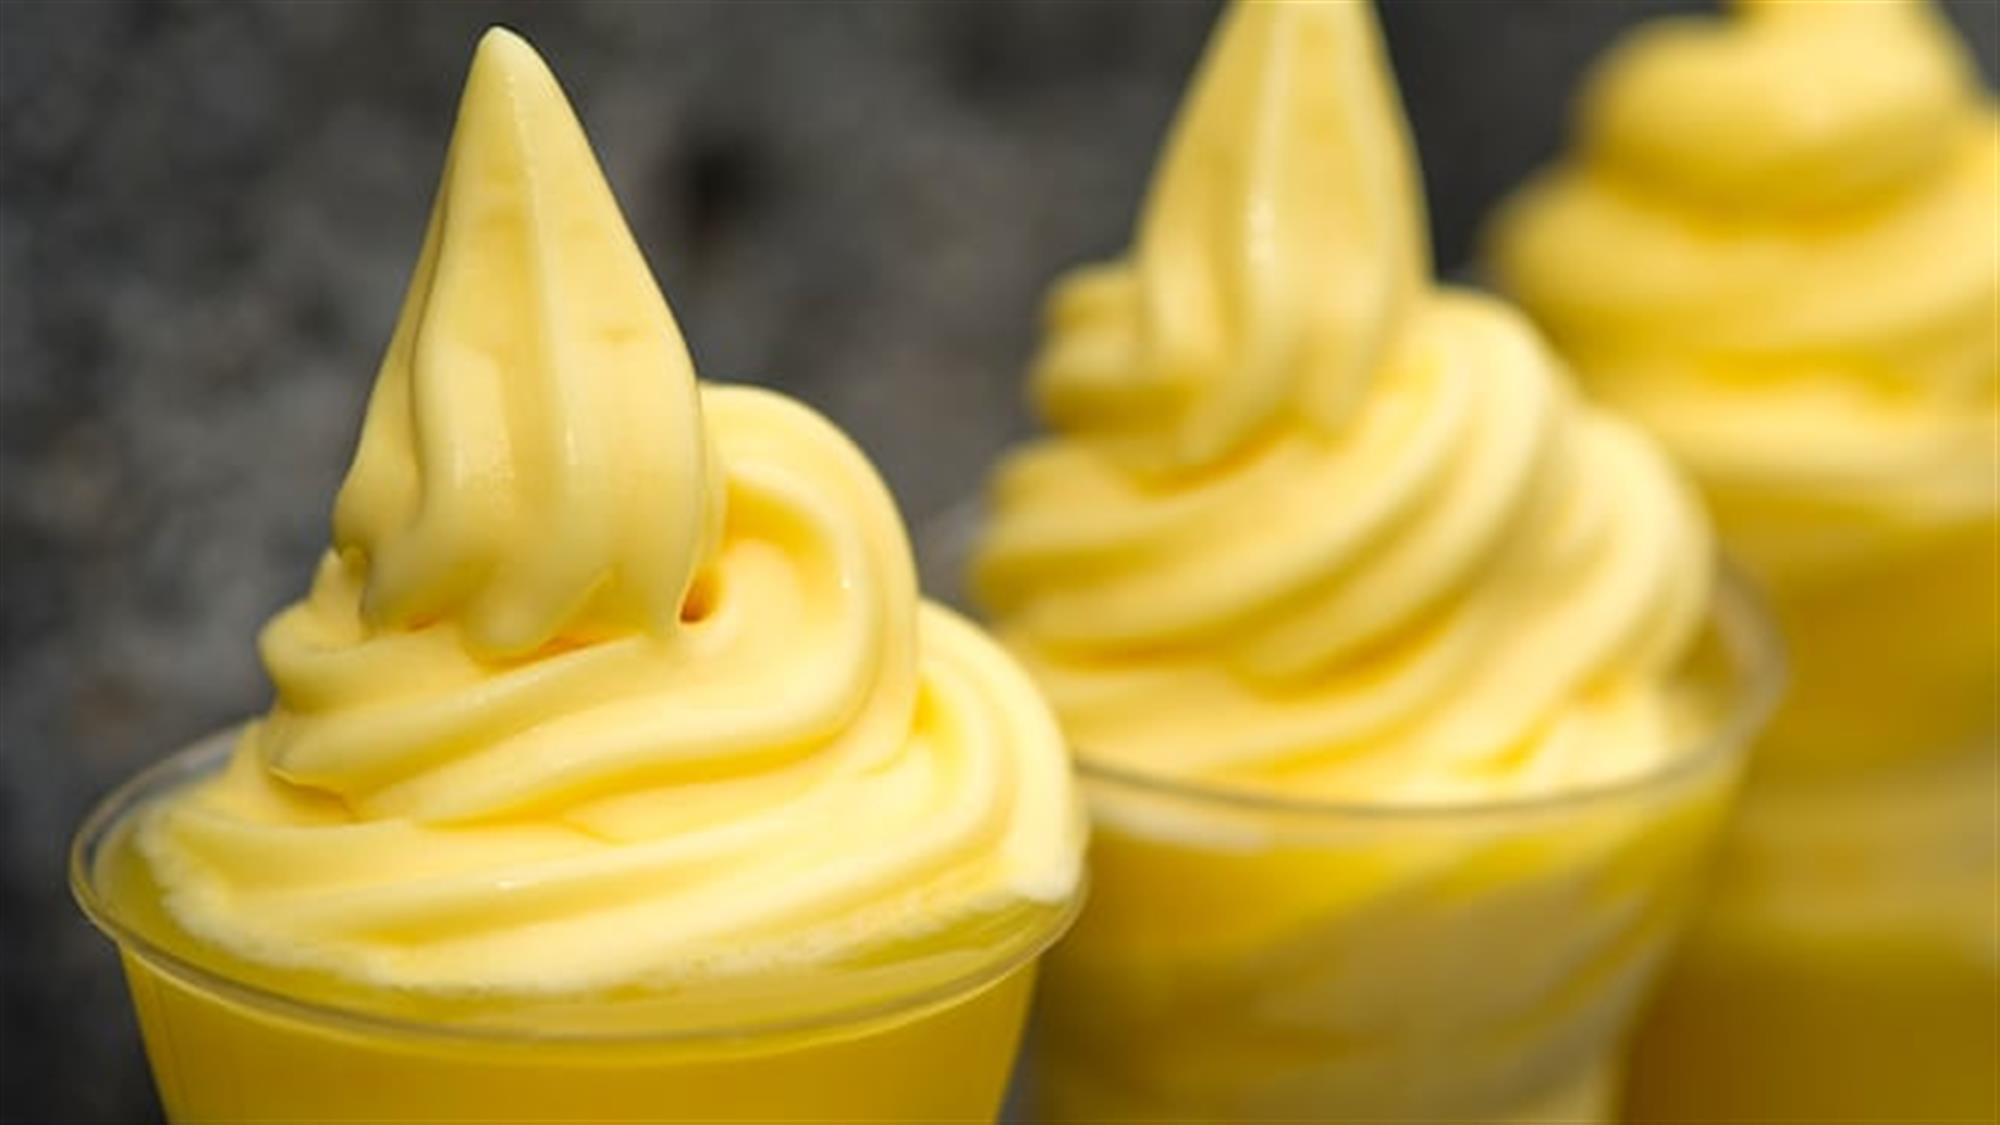 Three cups filled with soft-serve Dole Whip at Aloha Isle in Magic Kingdom park